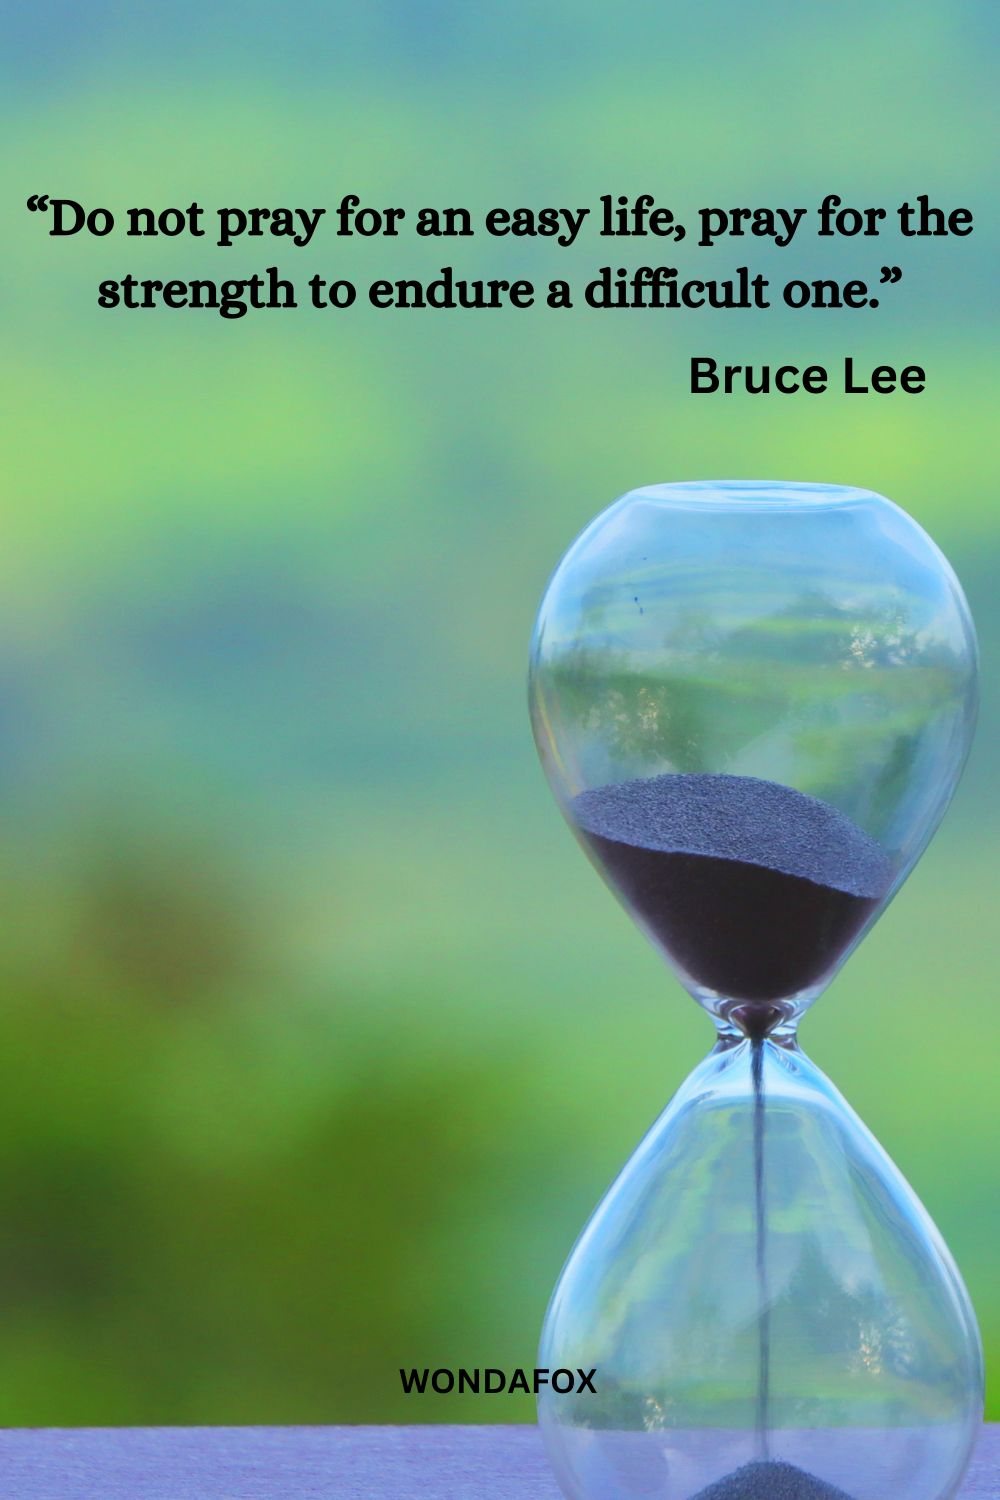 “Do not pray for an easy life, pray for the strength to endure a difficult one.”
Bruce Lee